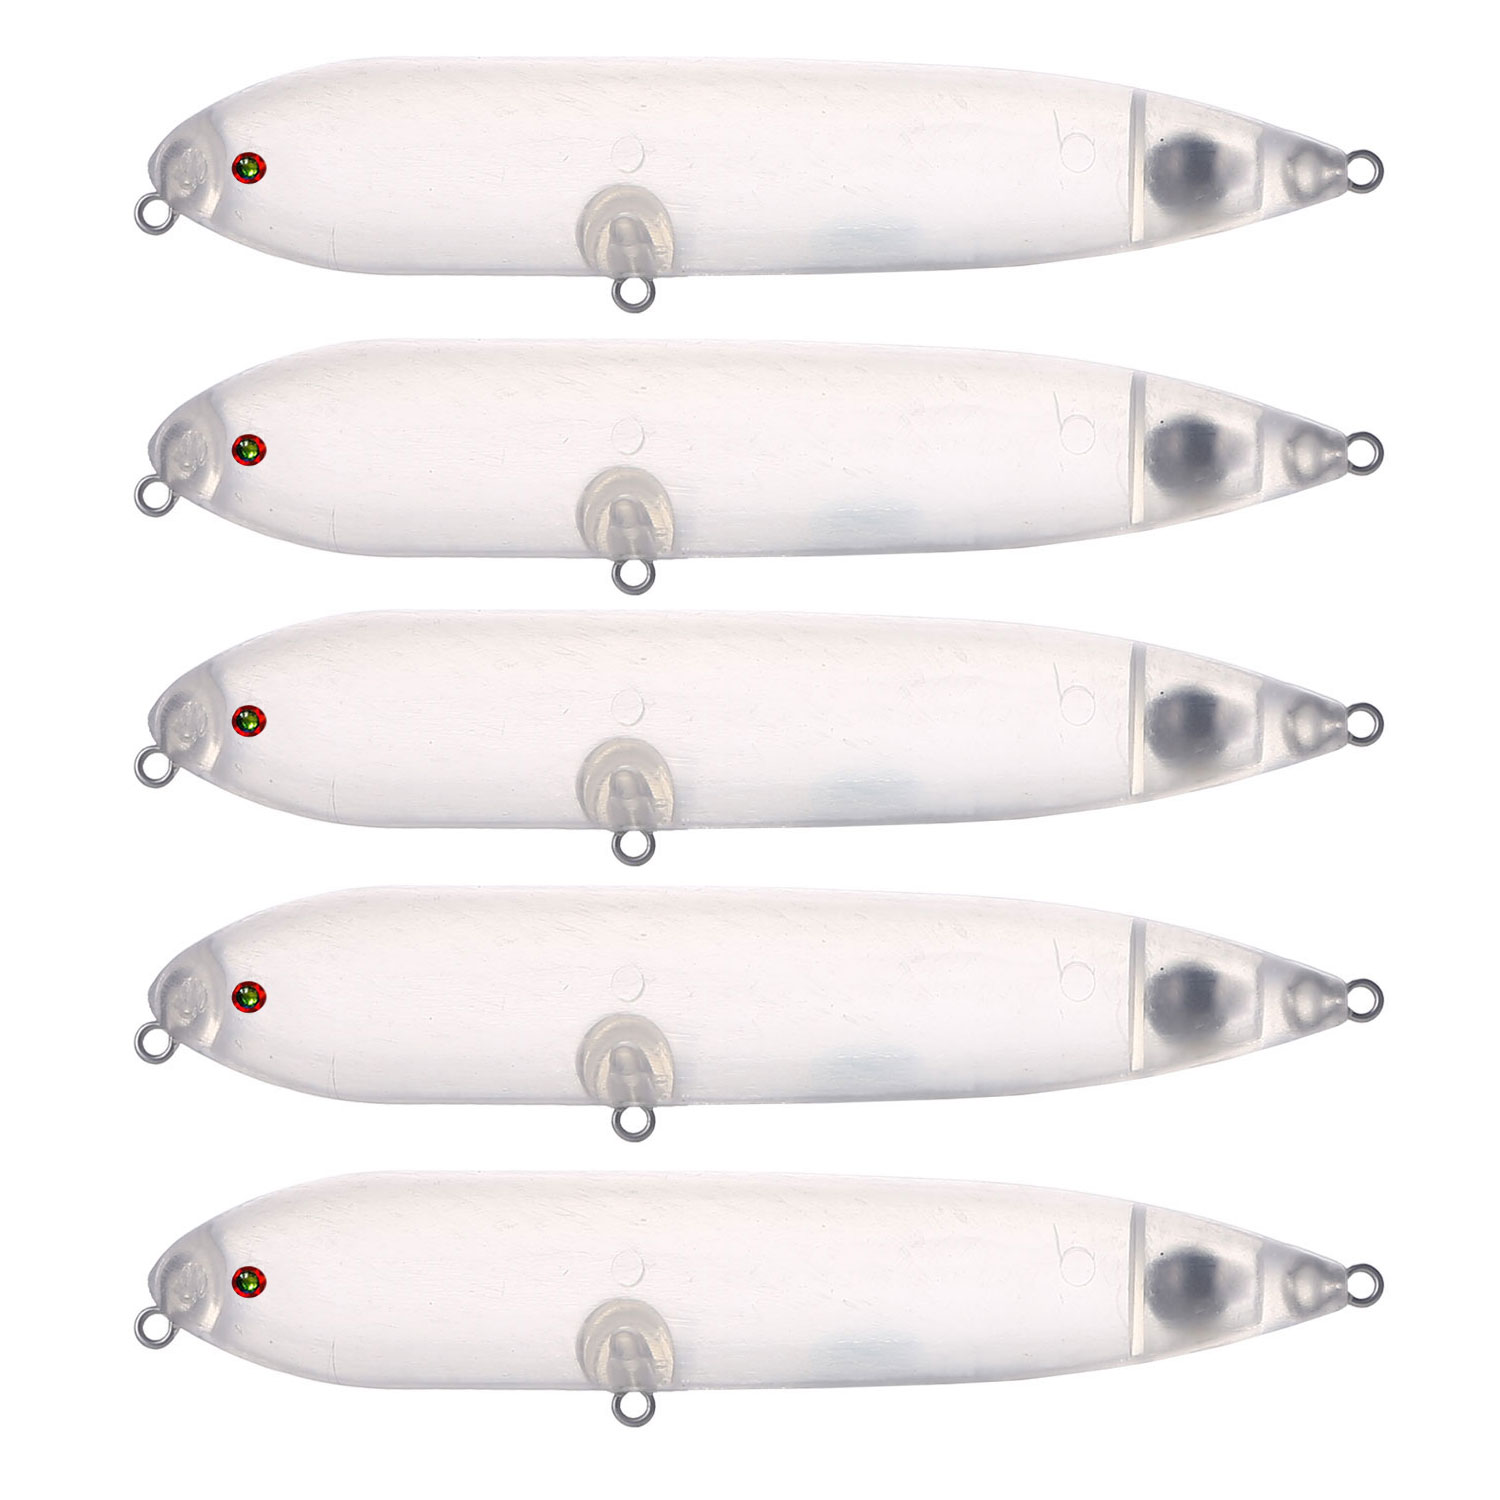 FREE FISHER Wholesale 100PCS Unpainted Crankbaits 13.3cm 12g Fishing Lure Blanks,Clear Hard Baits with 3D Fishing Eyes Fishing Pencil Lures for Freshwater/Saltwater